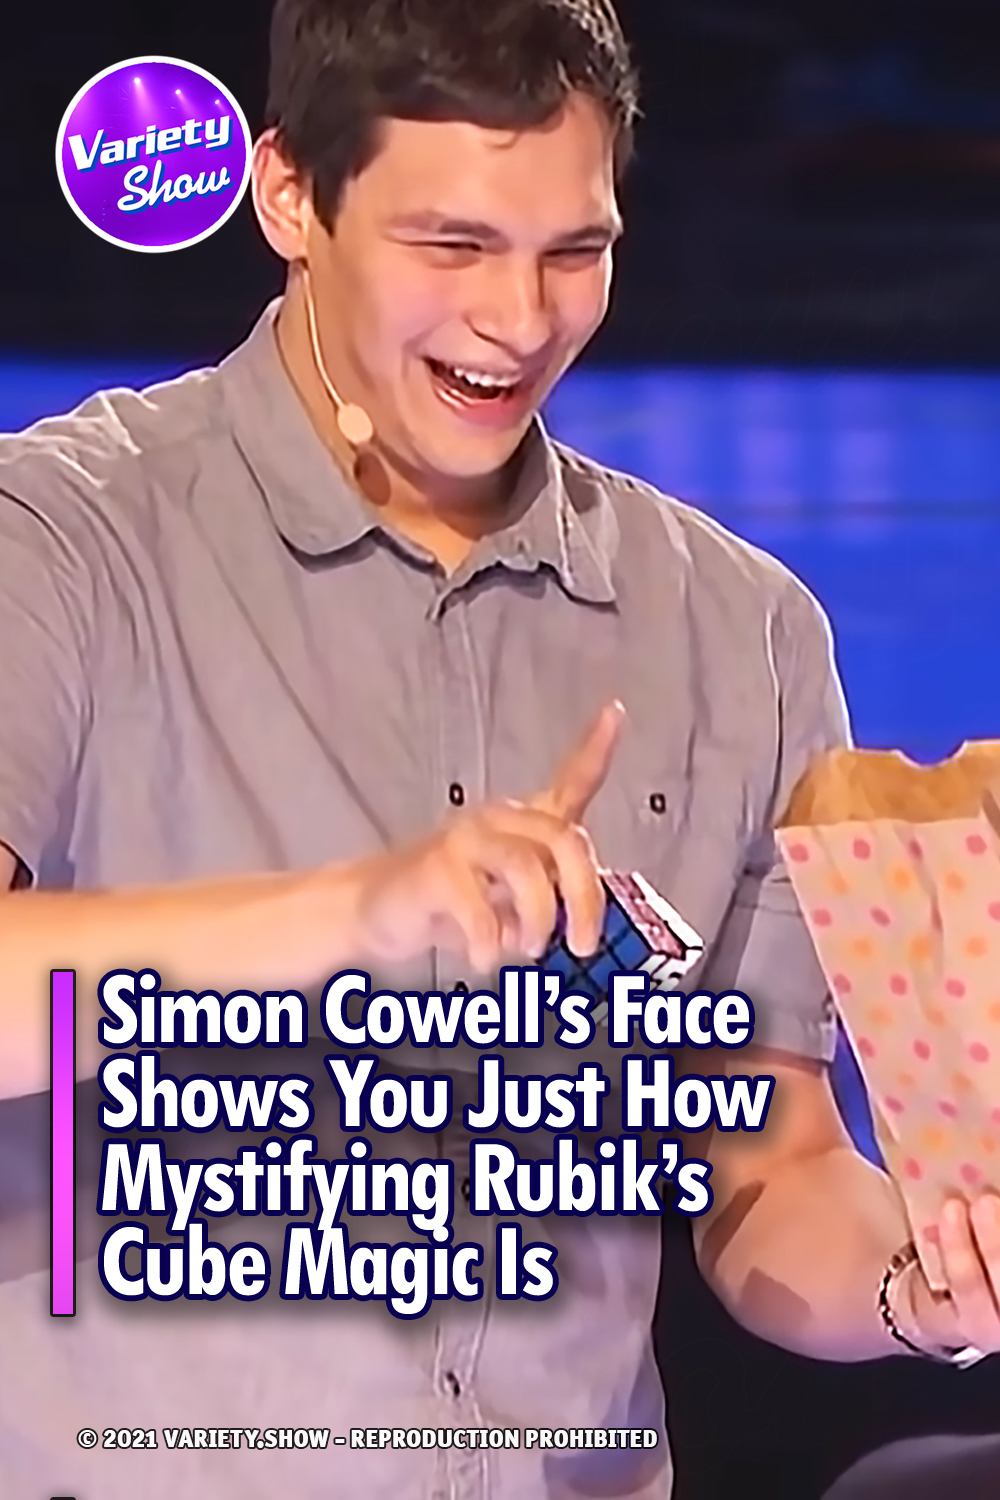 Simon Cowell’s Face Shows You Just How Mystifying Rubik’s Cube Magic Is